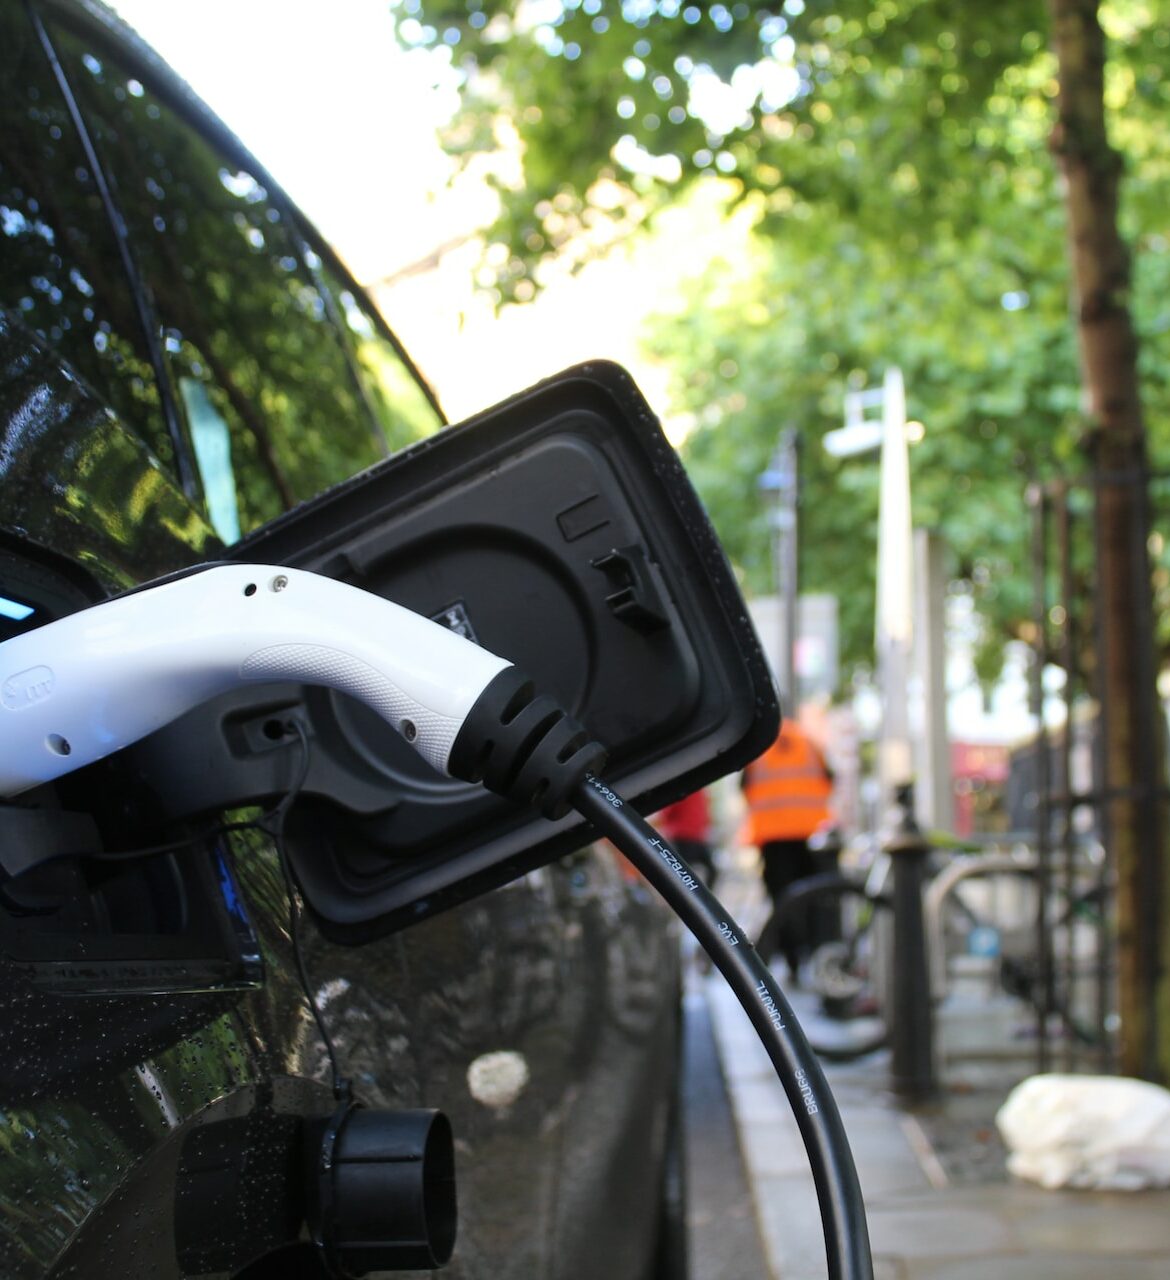 A black EV charges on the side of a tree-lined street. In the background, a construction crew in orange vests mingles on a wide sidewalk with bike parking.